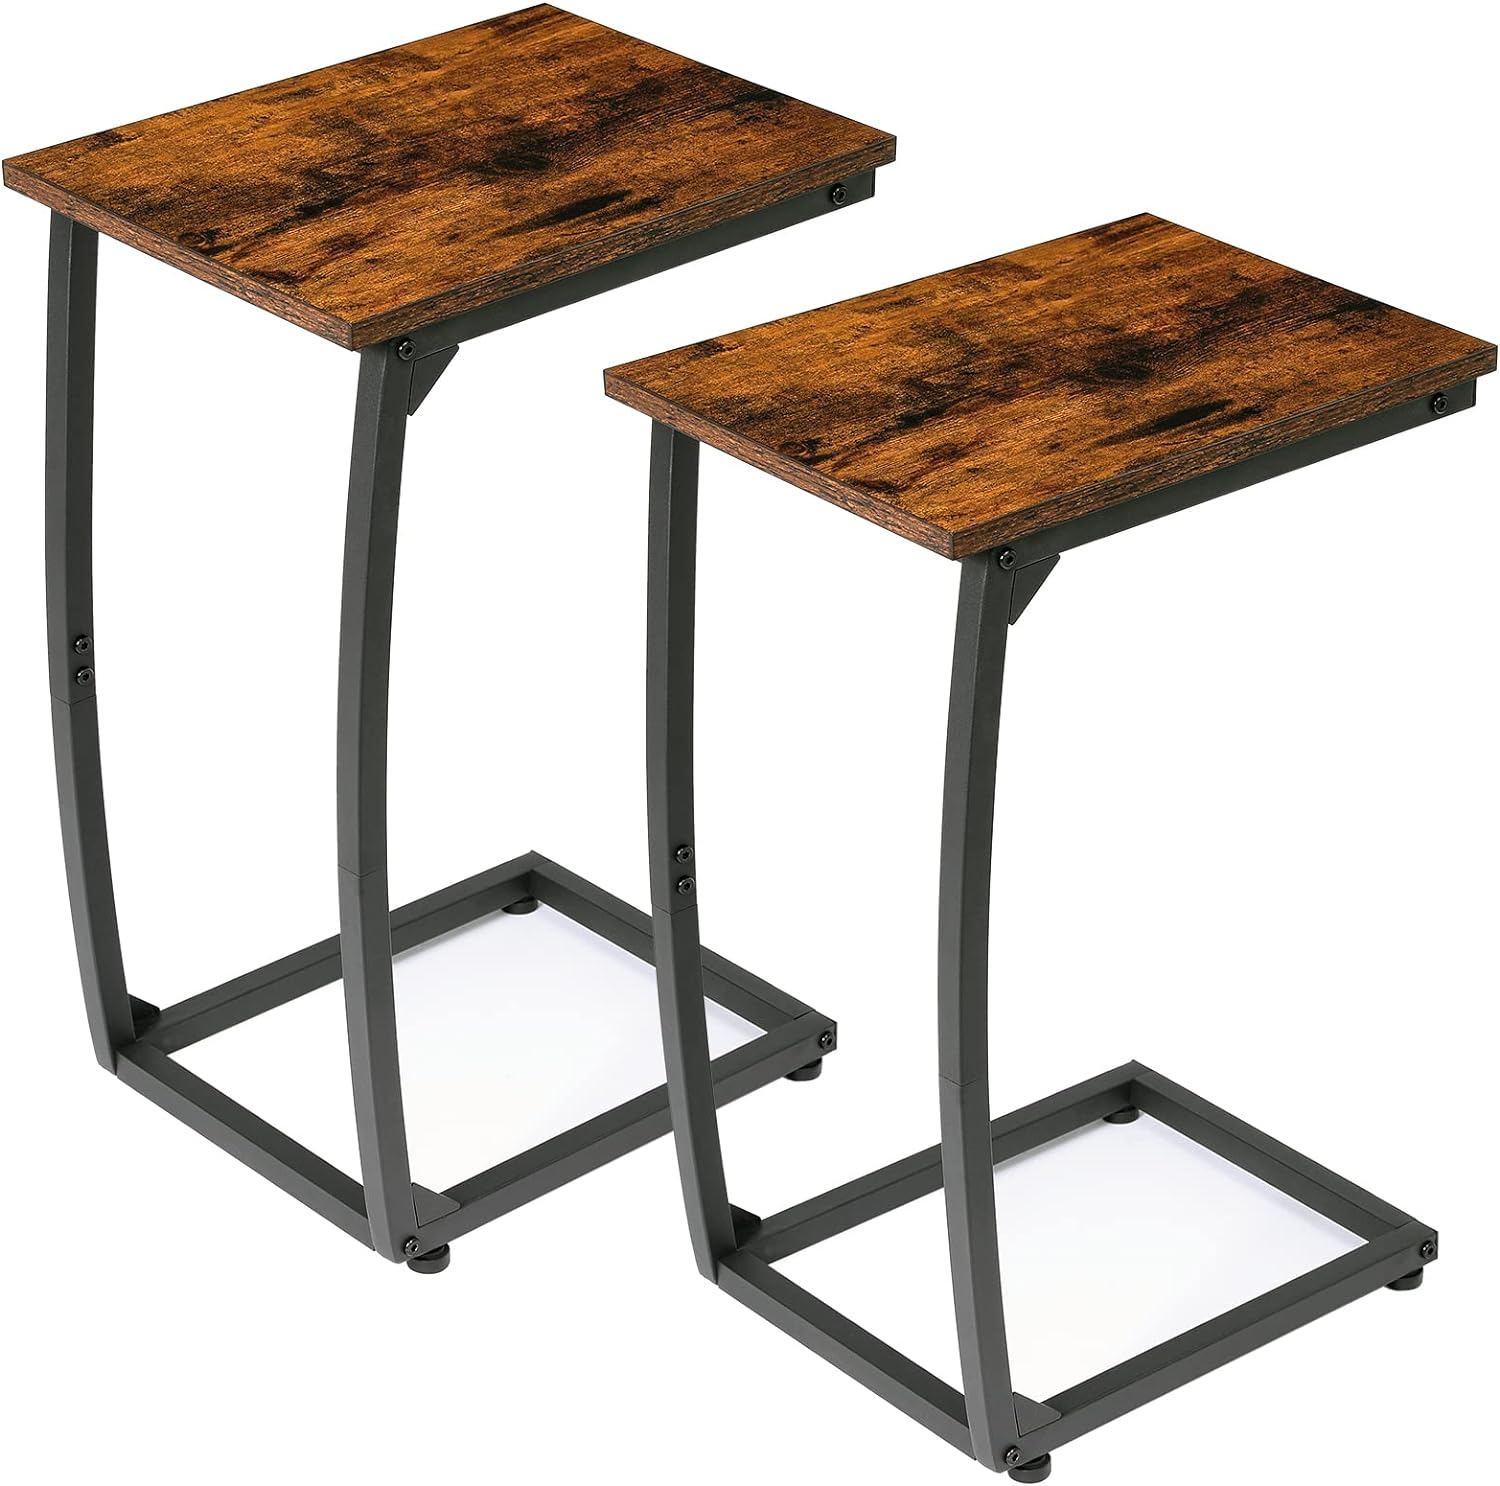 C Shaped End Table Side Table of 2, Small Sofa Table with Metal Frame for Living Room Bedroom Small Spaces (Rustic Brown)